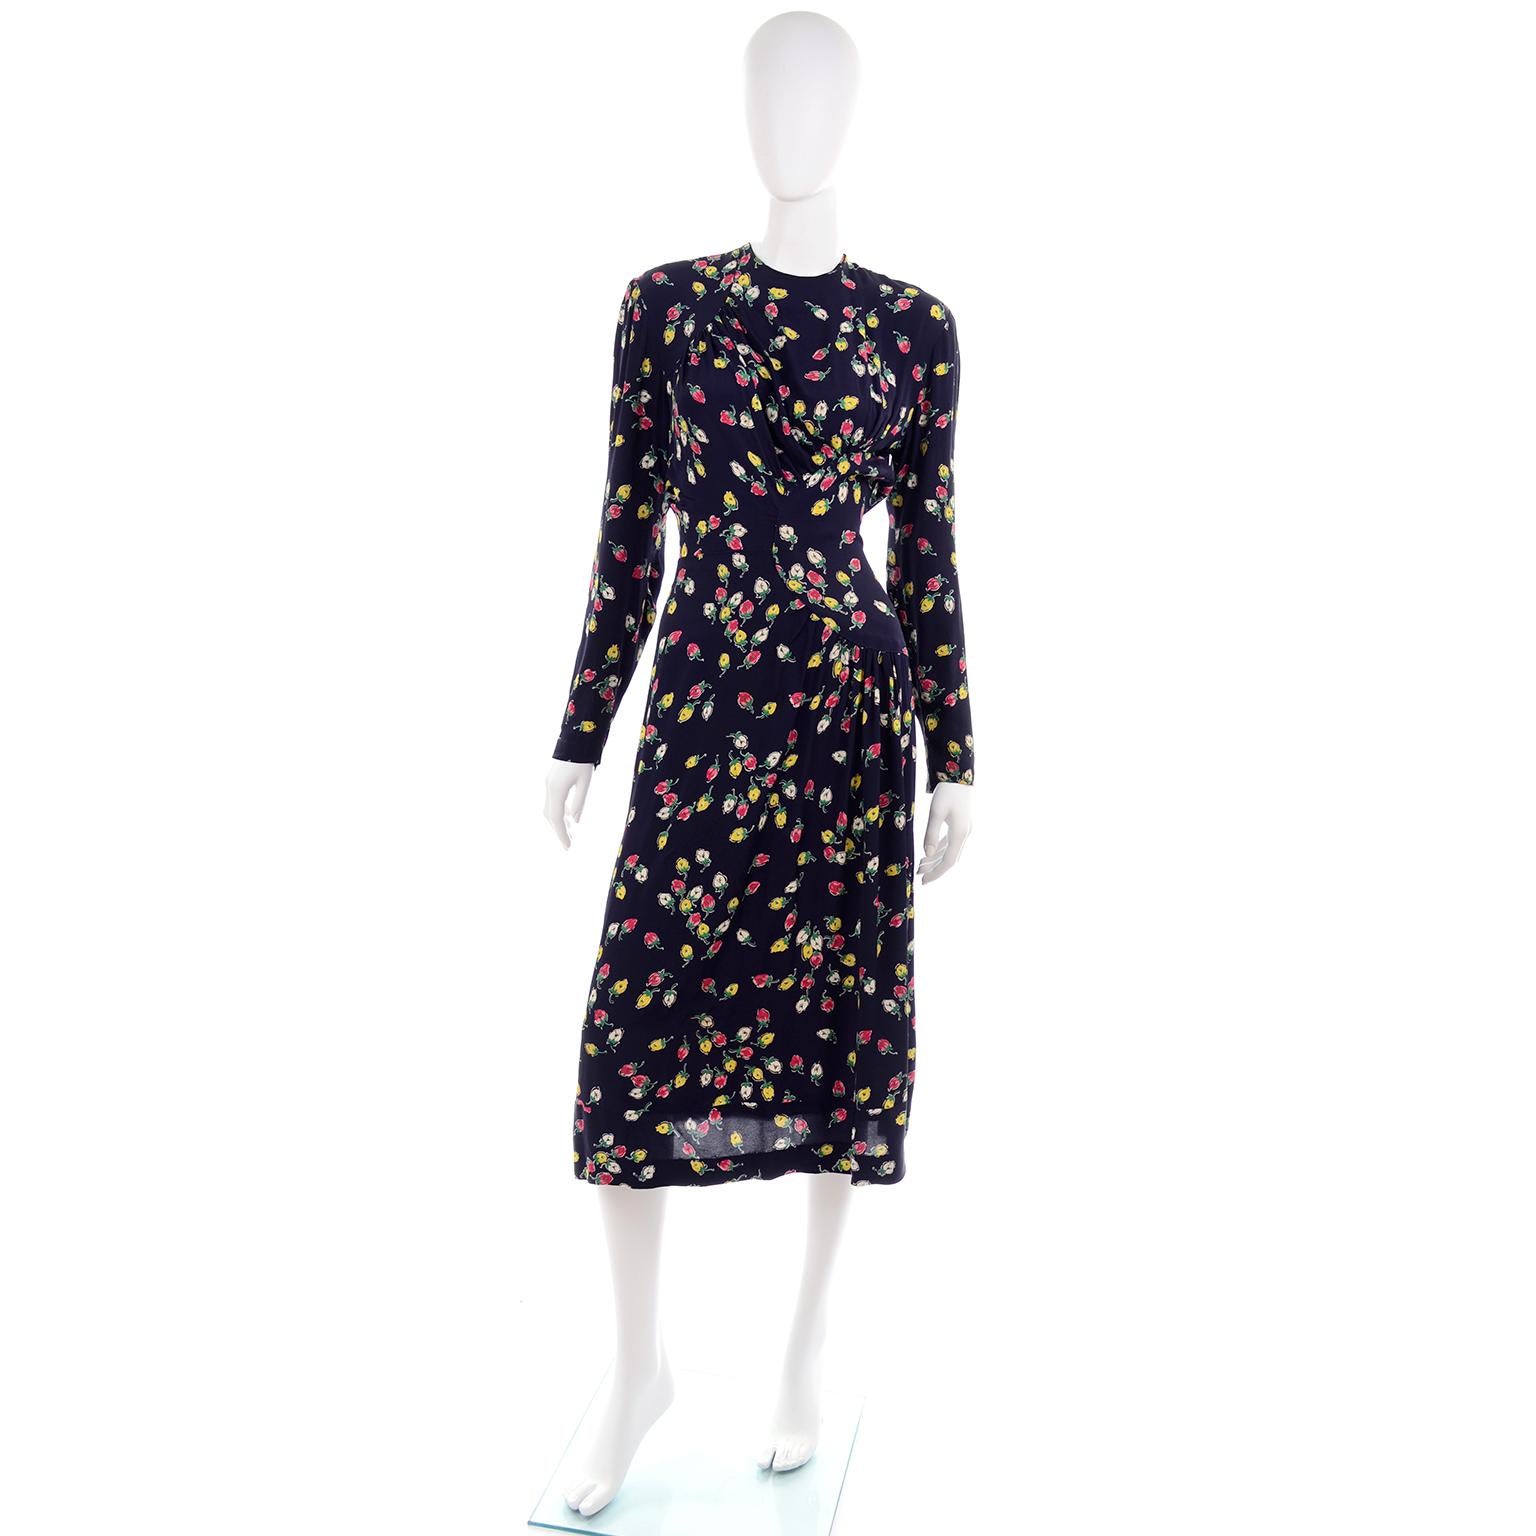 This is a great 1940;s  vintage navy midi dress with a colorful rosebud print. The pretty roses are in shades of pink, yellow and white with green stems. This dress is easy to assimilate into a modern wardrobe and has long sleeves, a gathered 